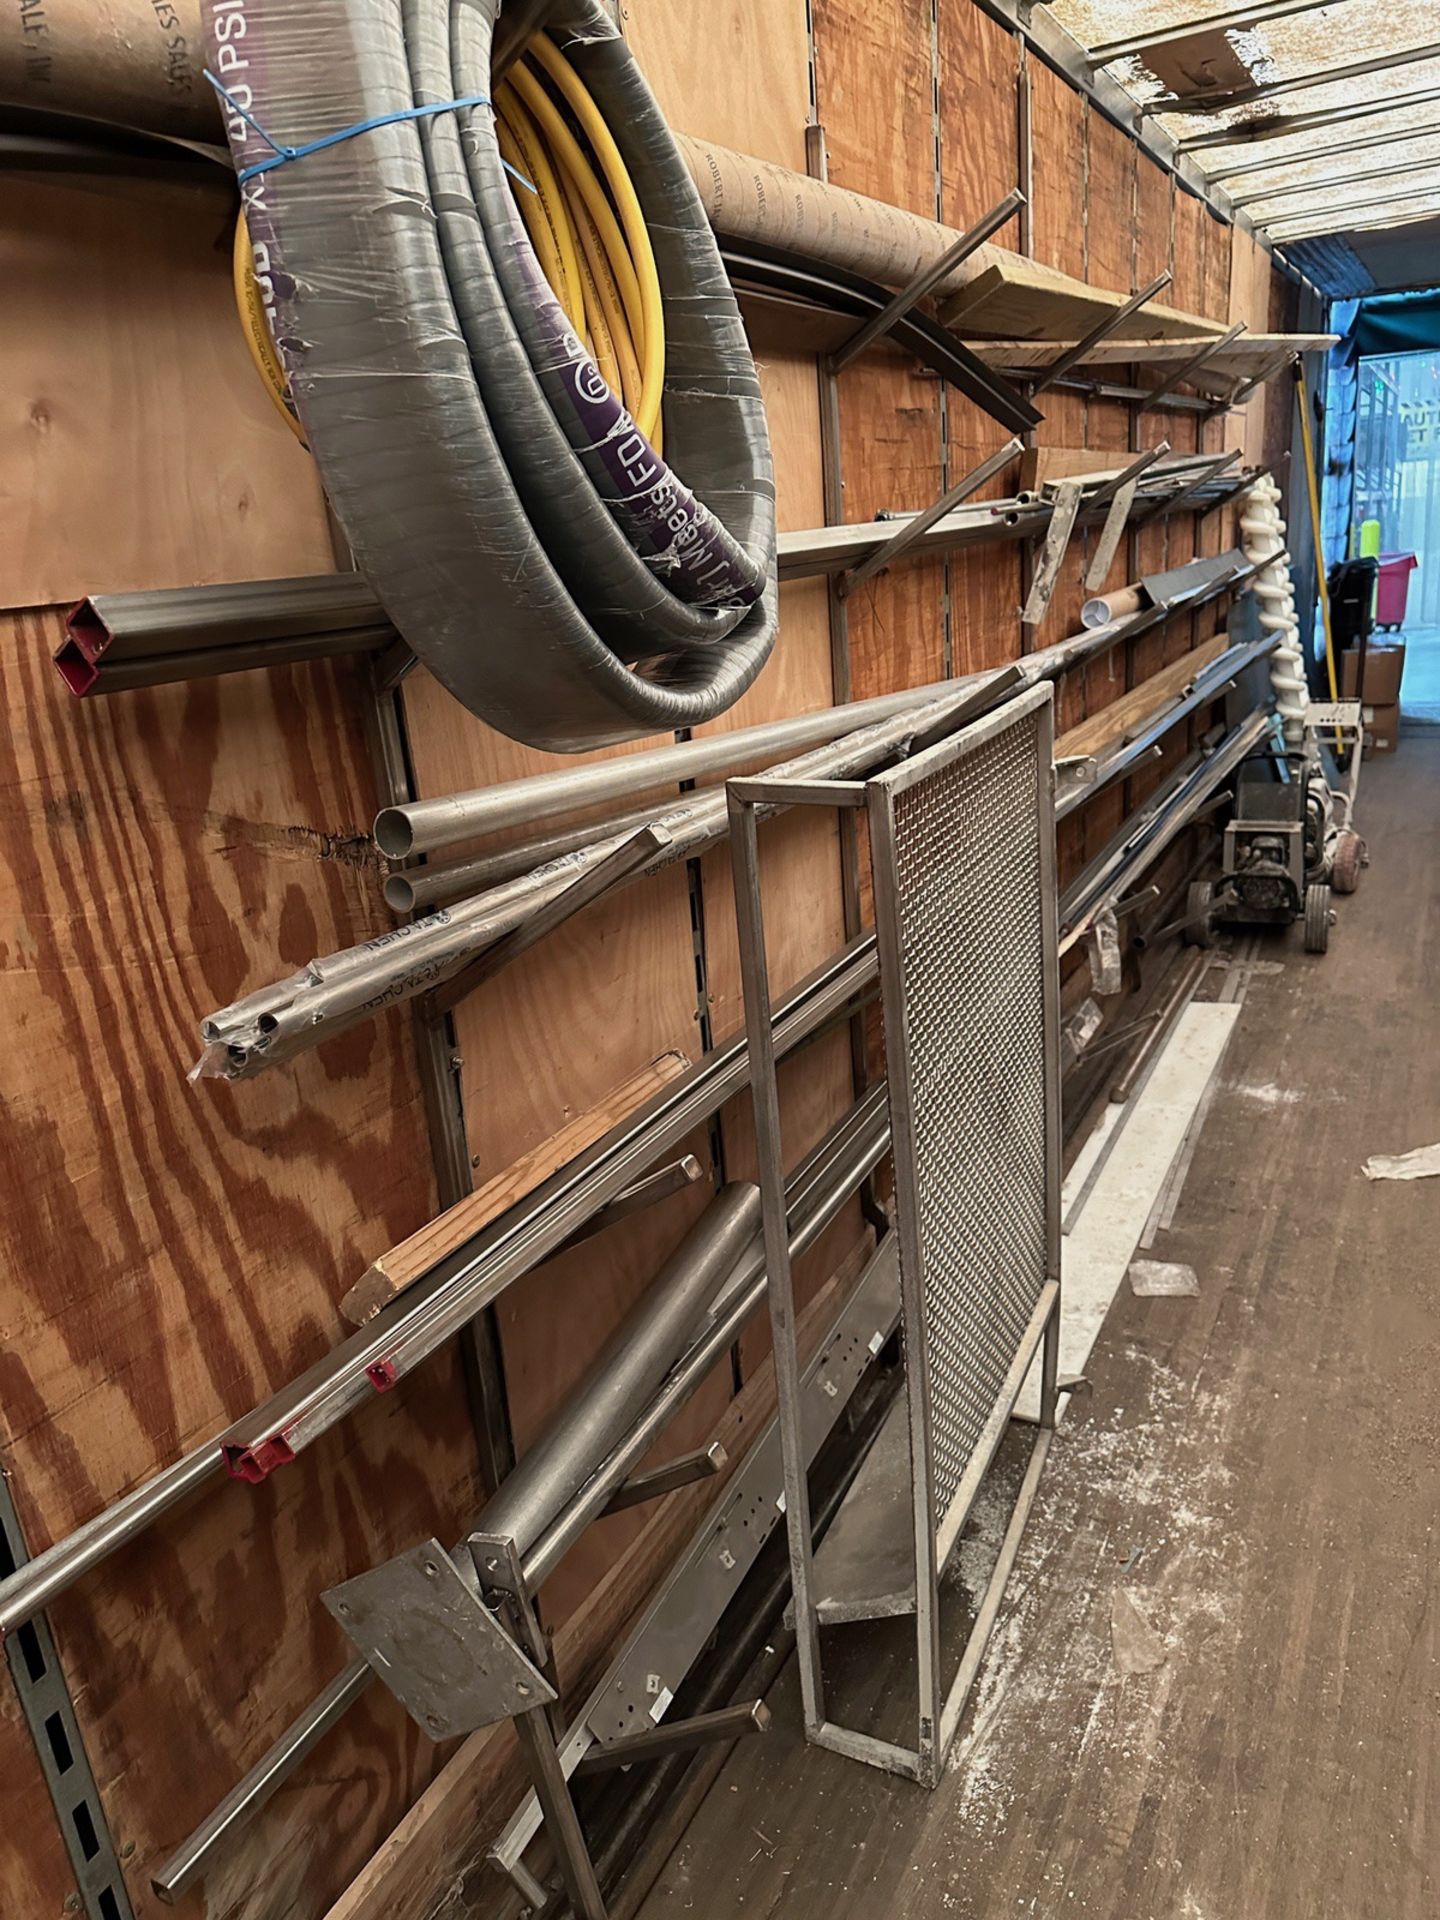 Lot of Trailer Contents and Shelving Units | Rig Fee $750 - Image 9 of 9